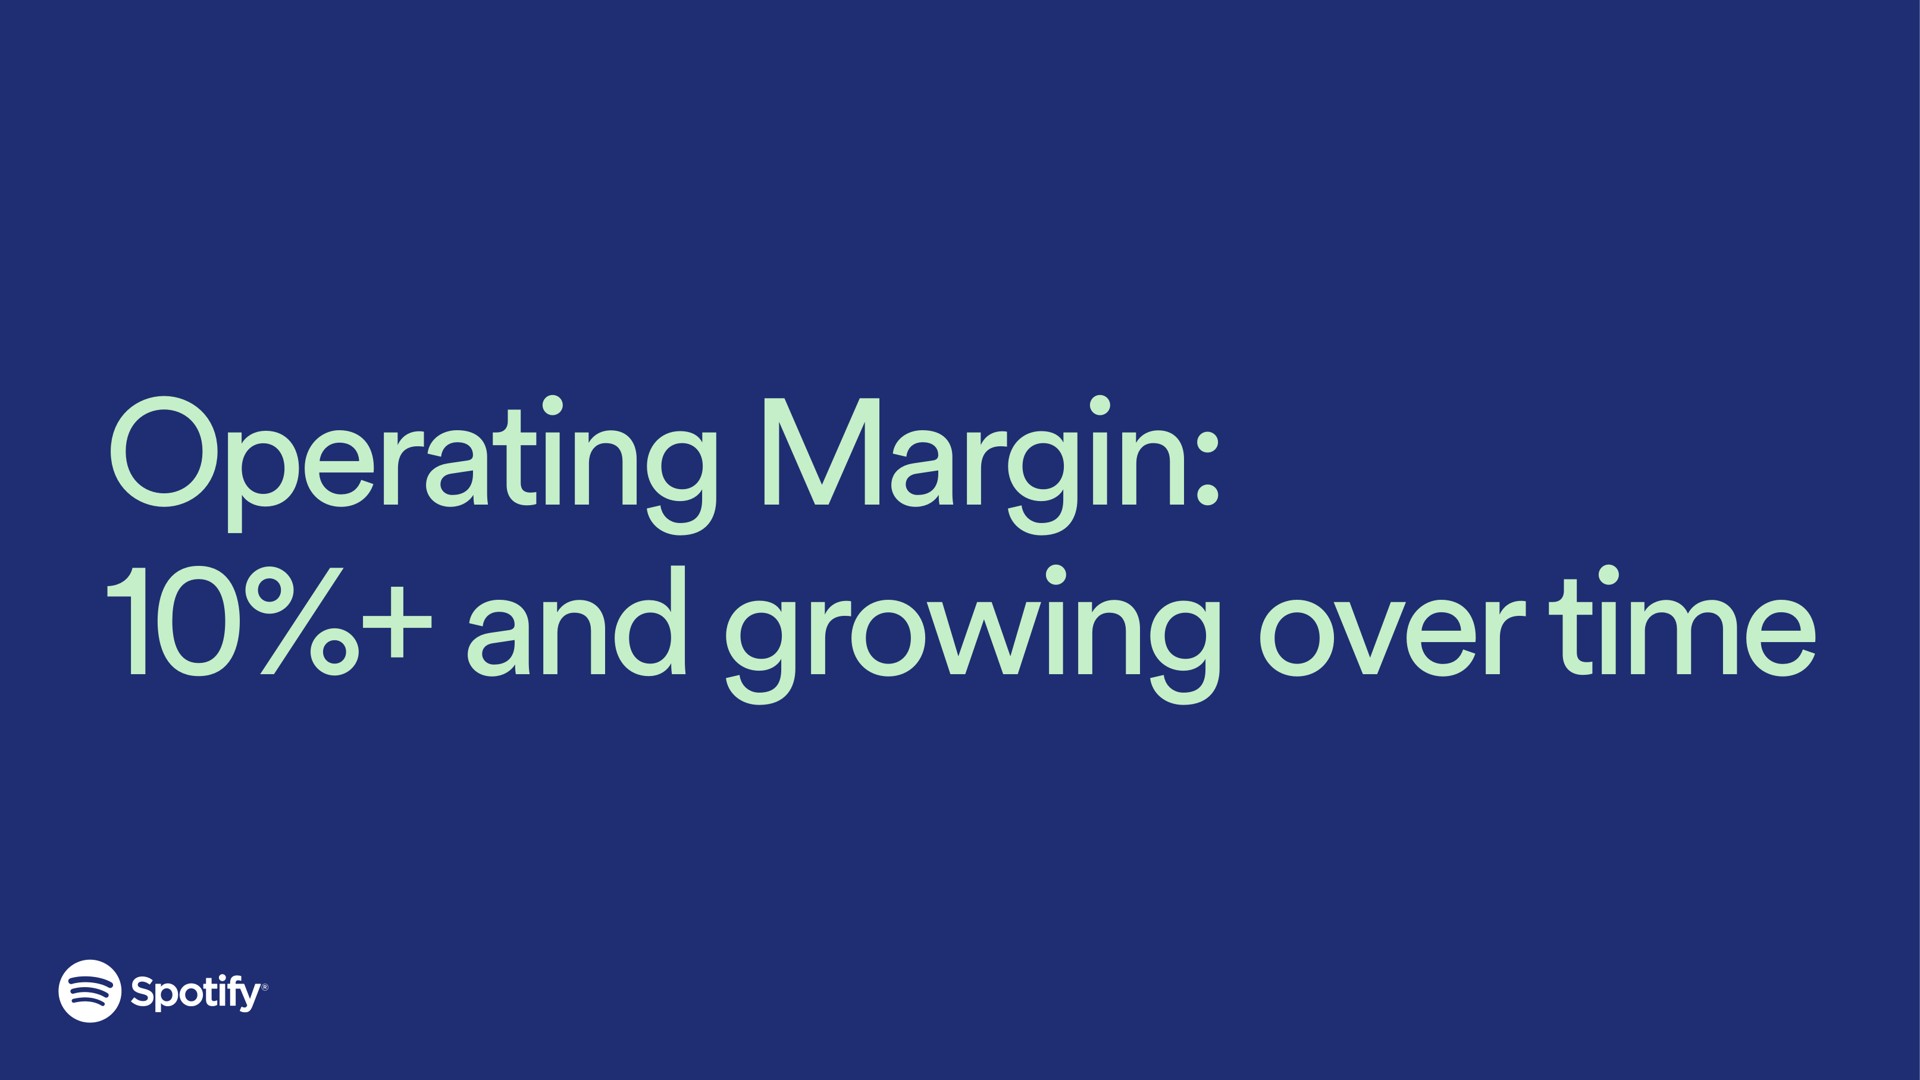 operating margin and growing over time | Spotify